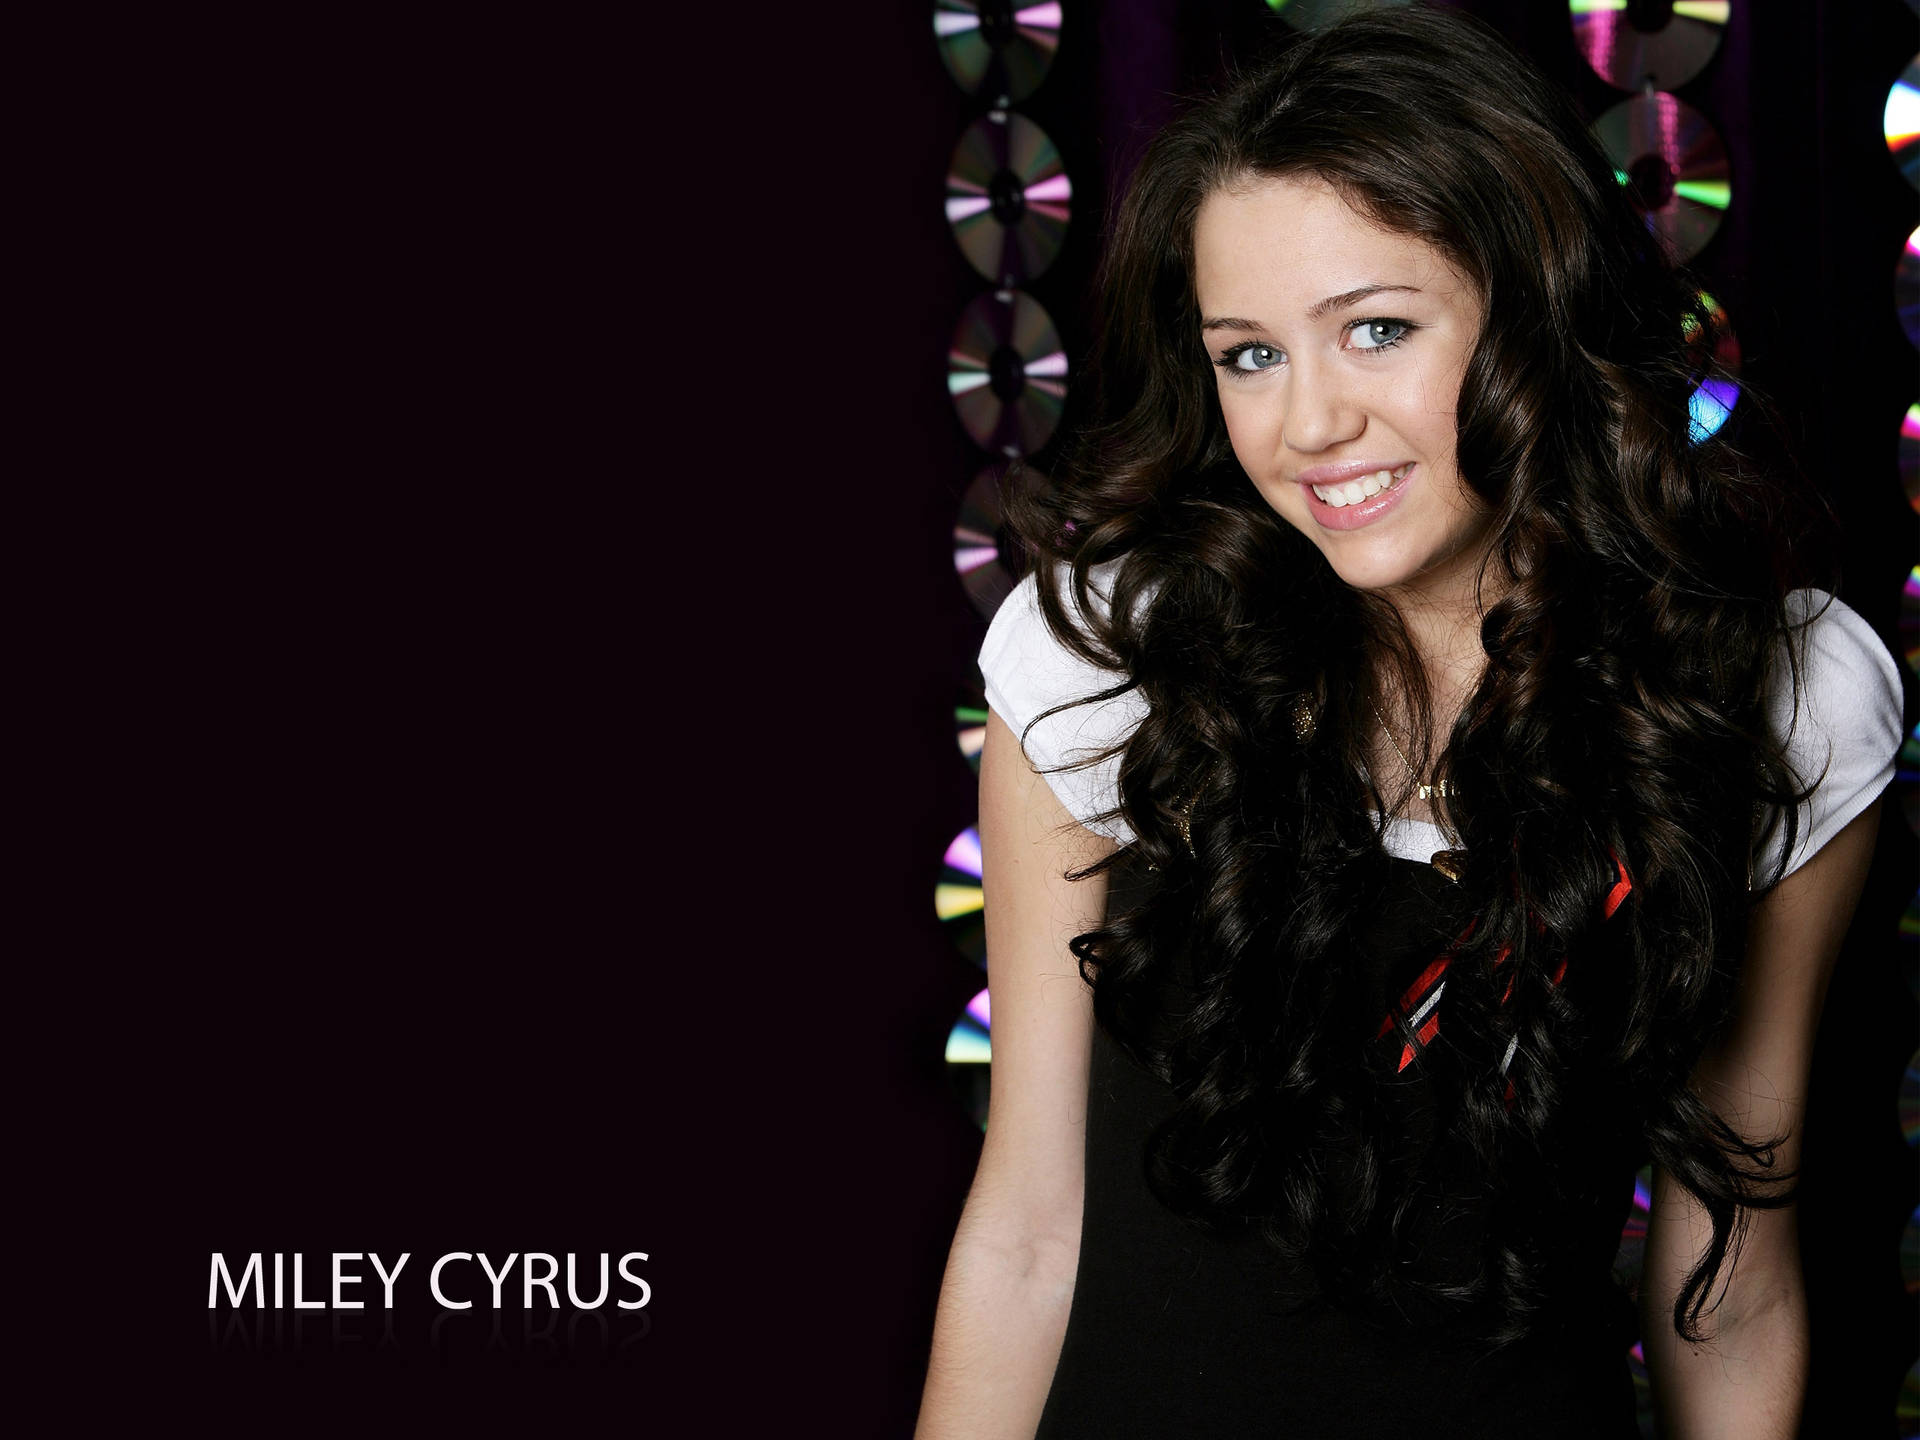 Young Singer Miley Cyrus Wallpaper